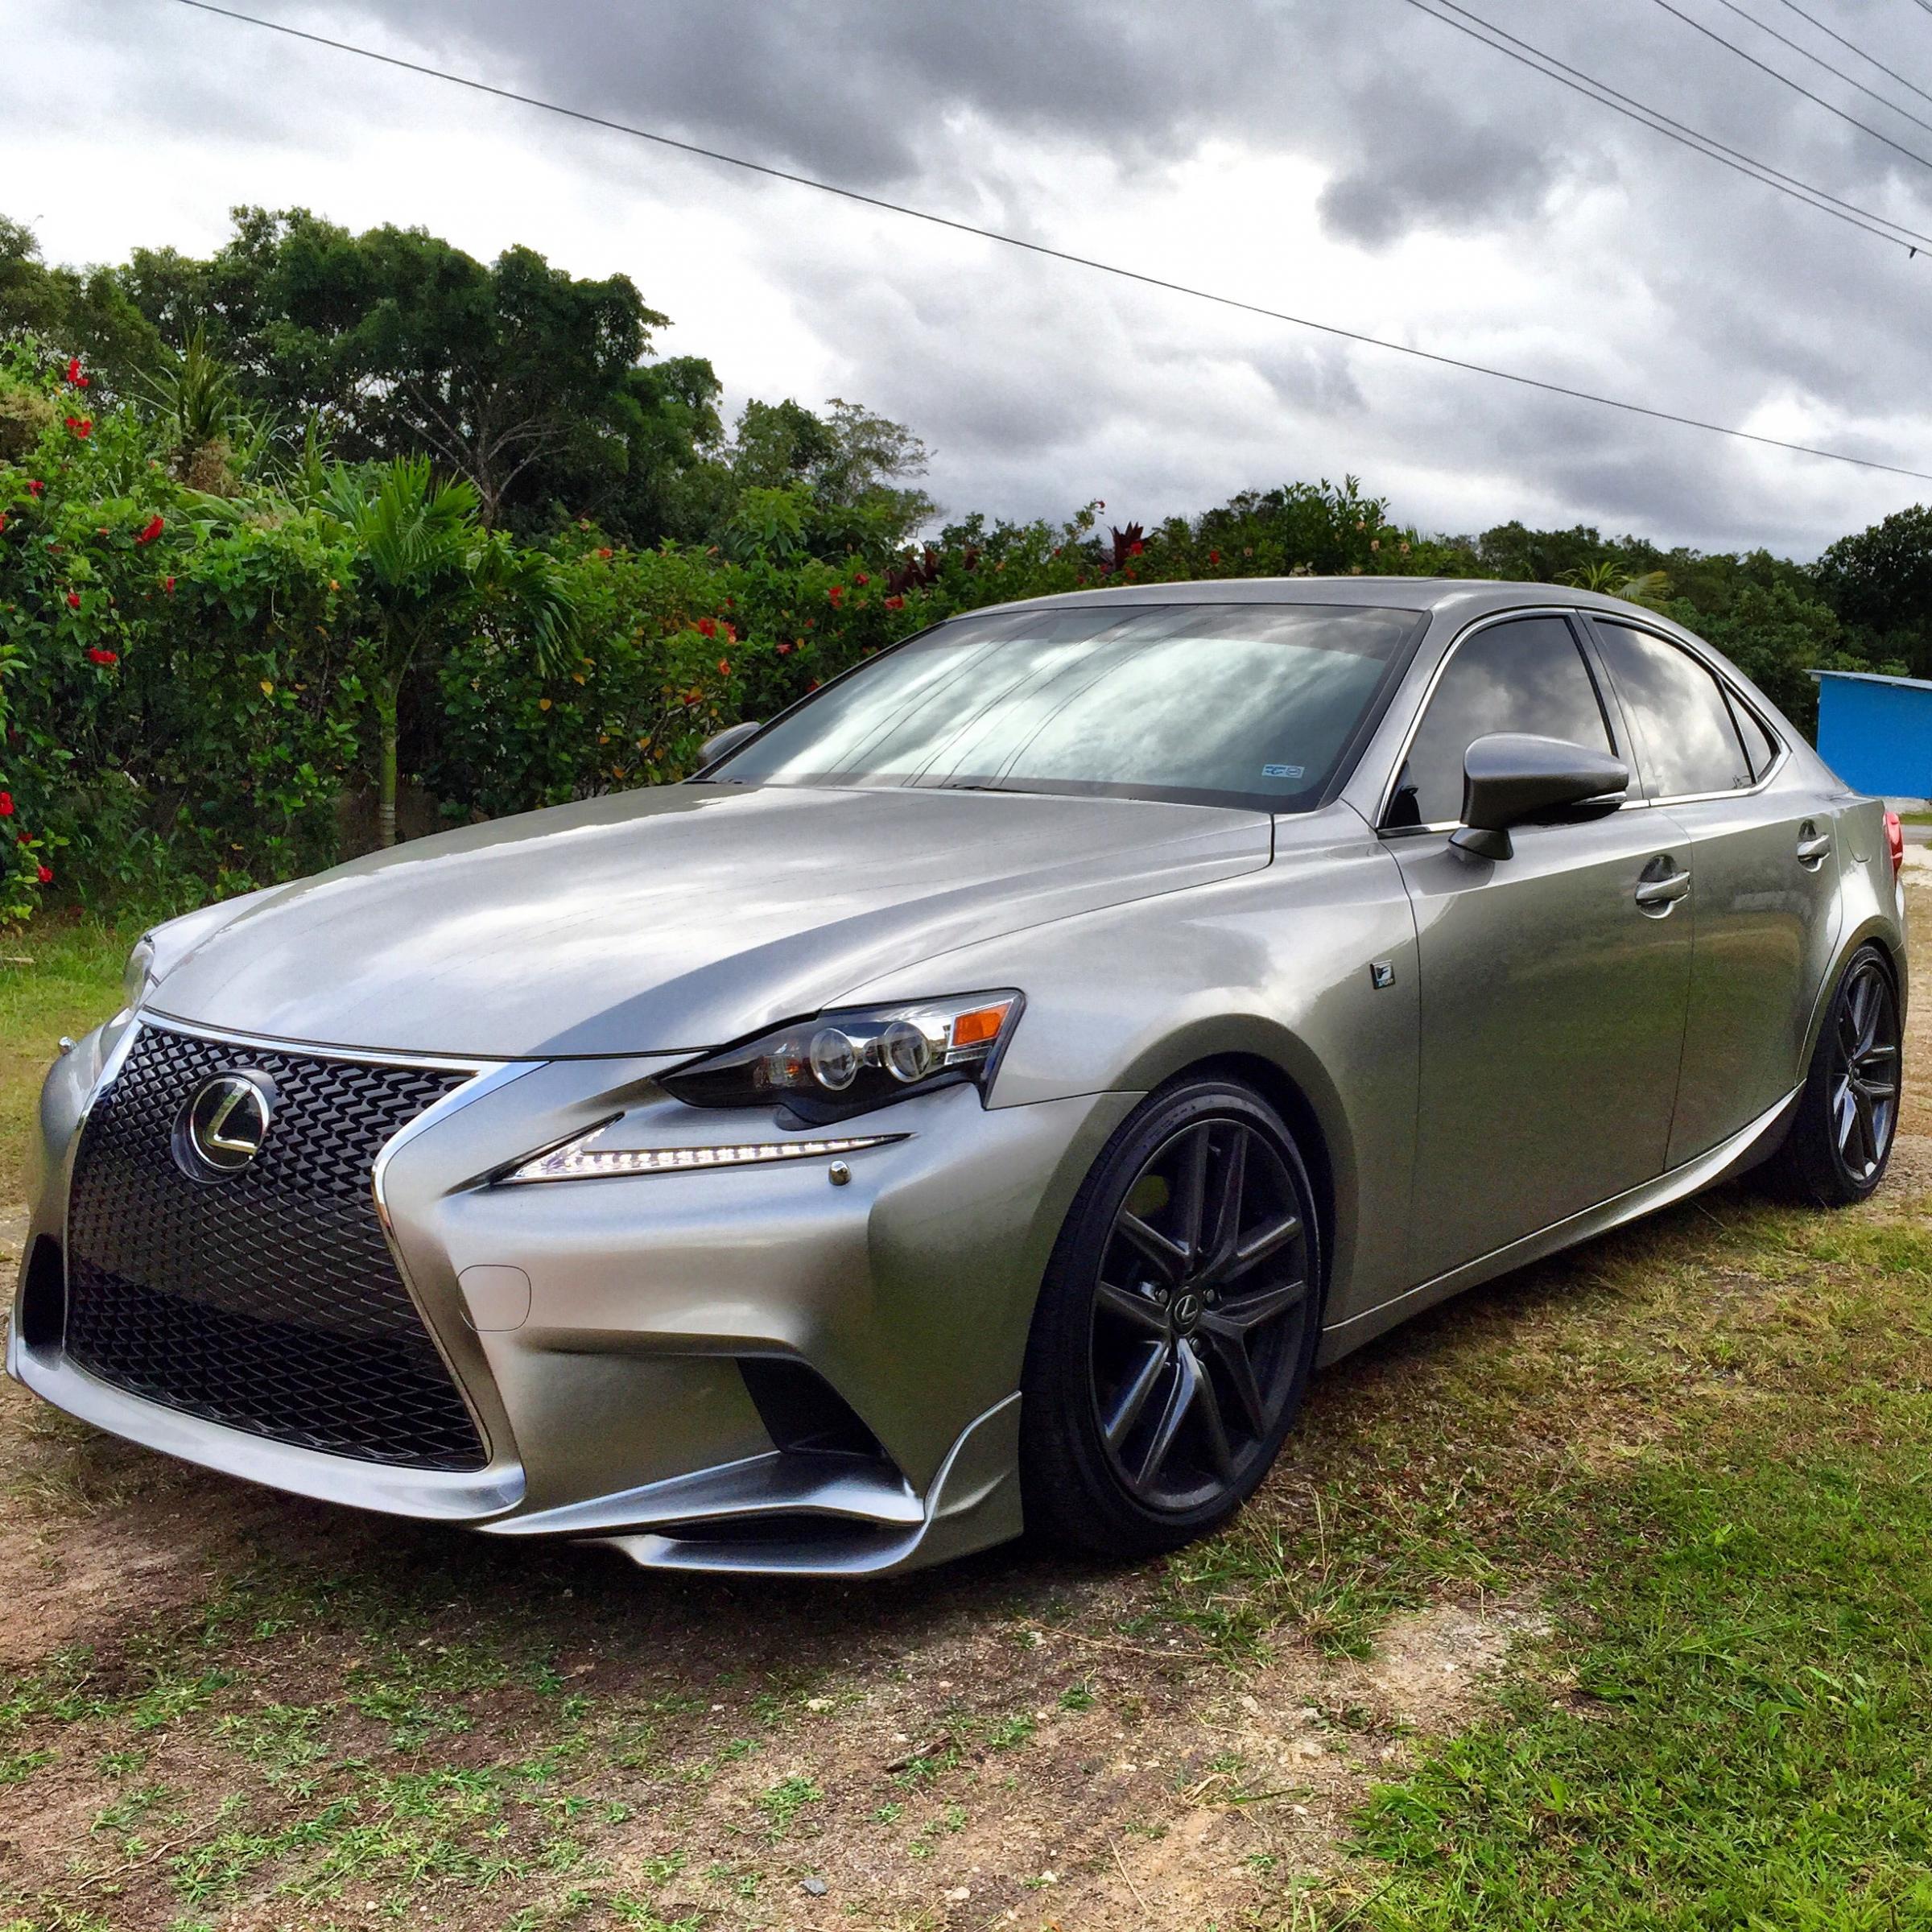 671 2015 Lexus IS350 FSport Atomic Silver Page 2 Club